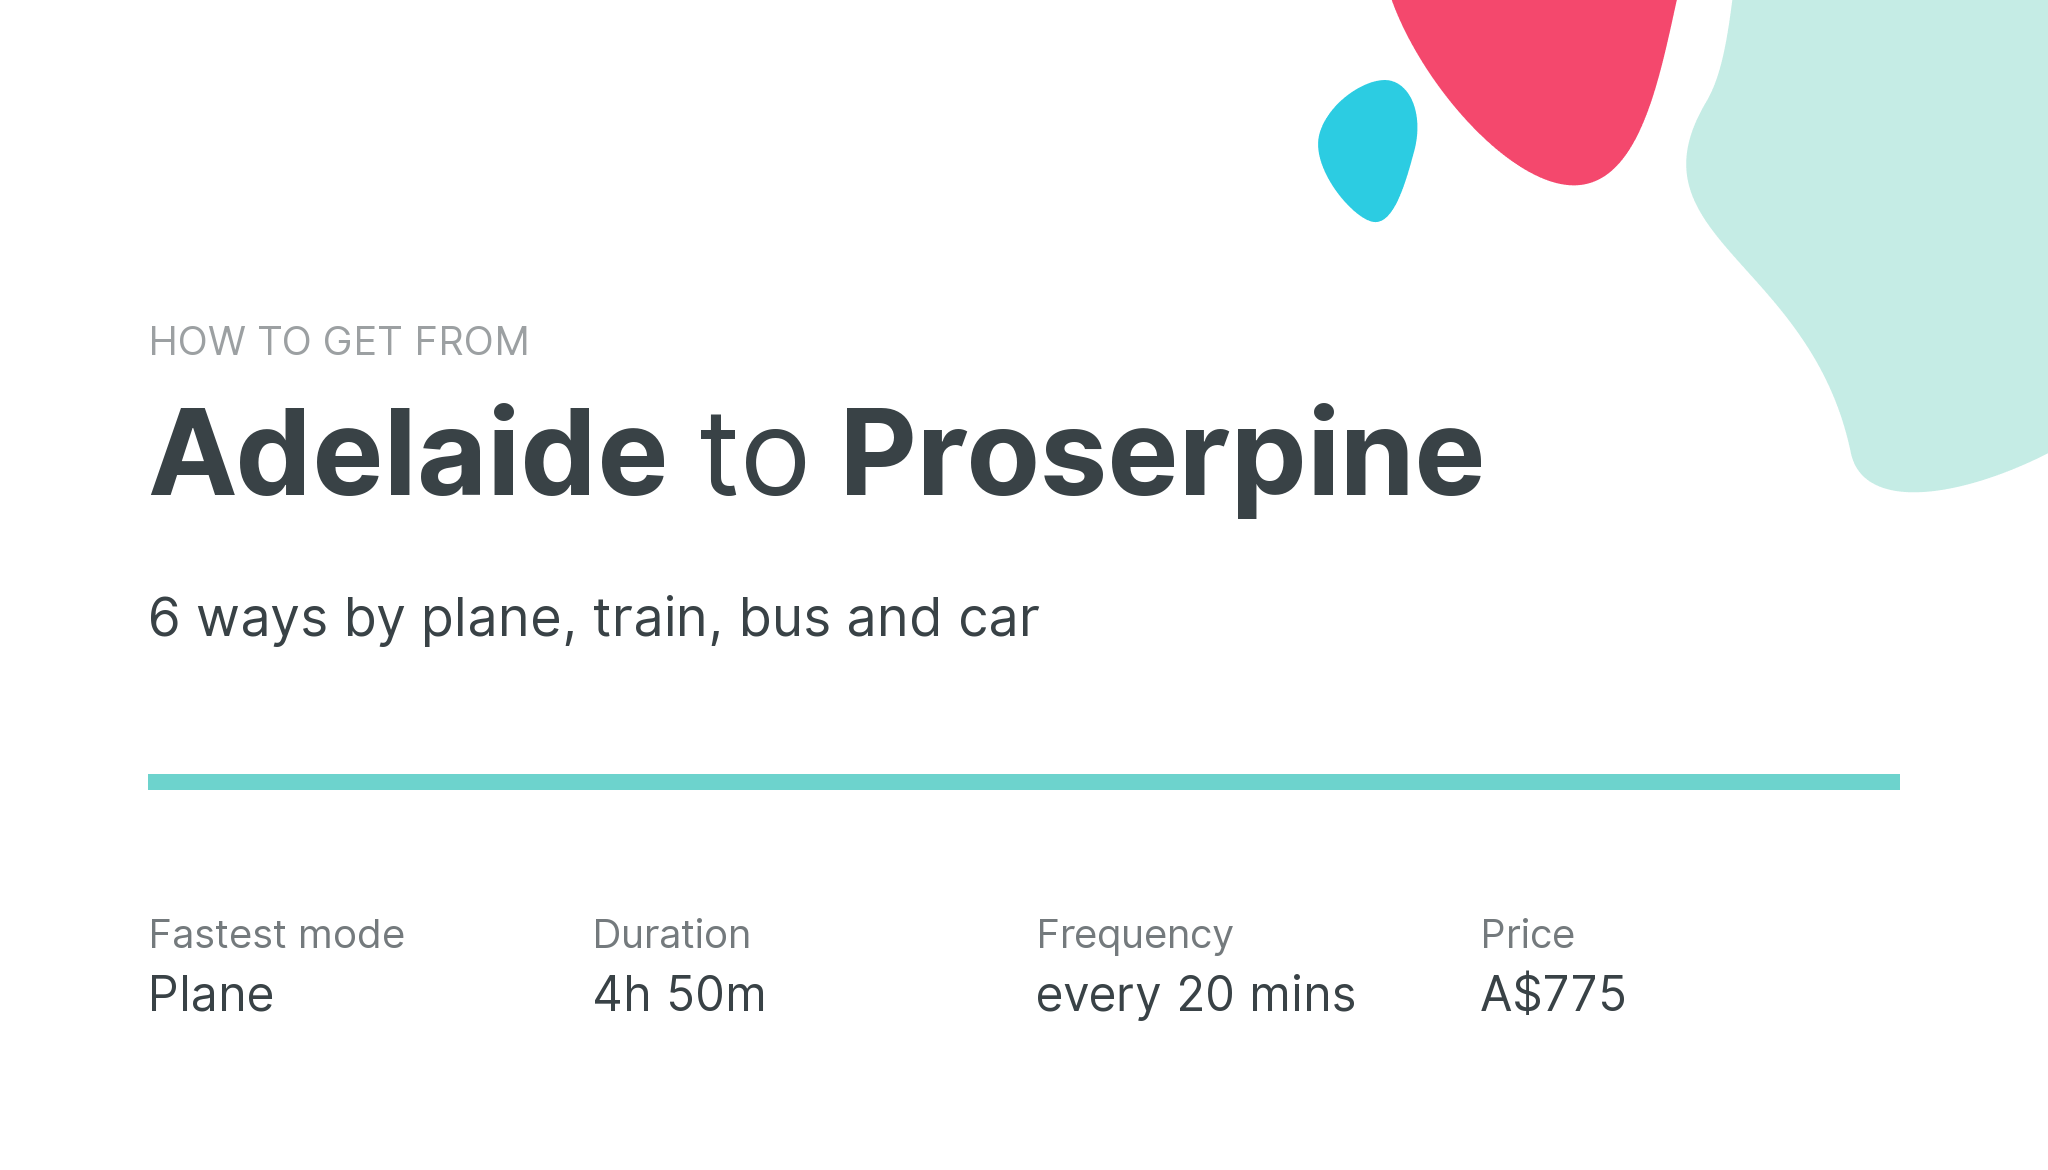 How do I get from Adelaide to Proserpine